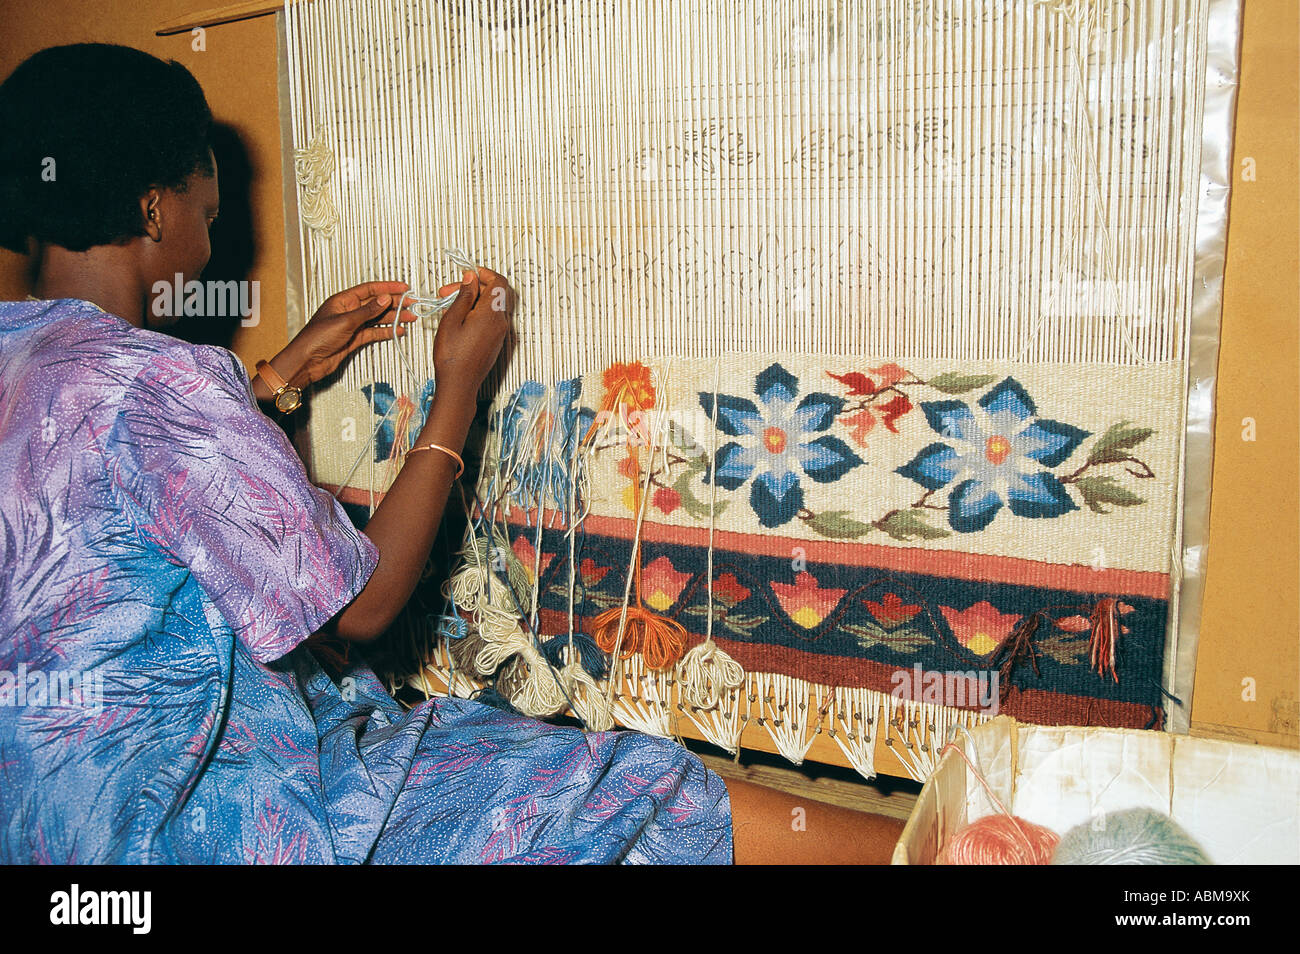 Woman at work carpet weaving with angora wool Lesotho Stock Photo